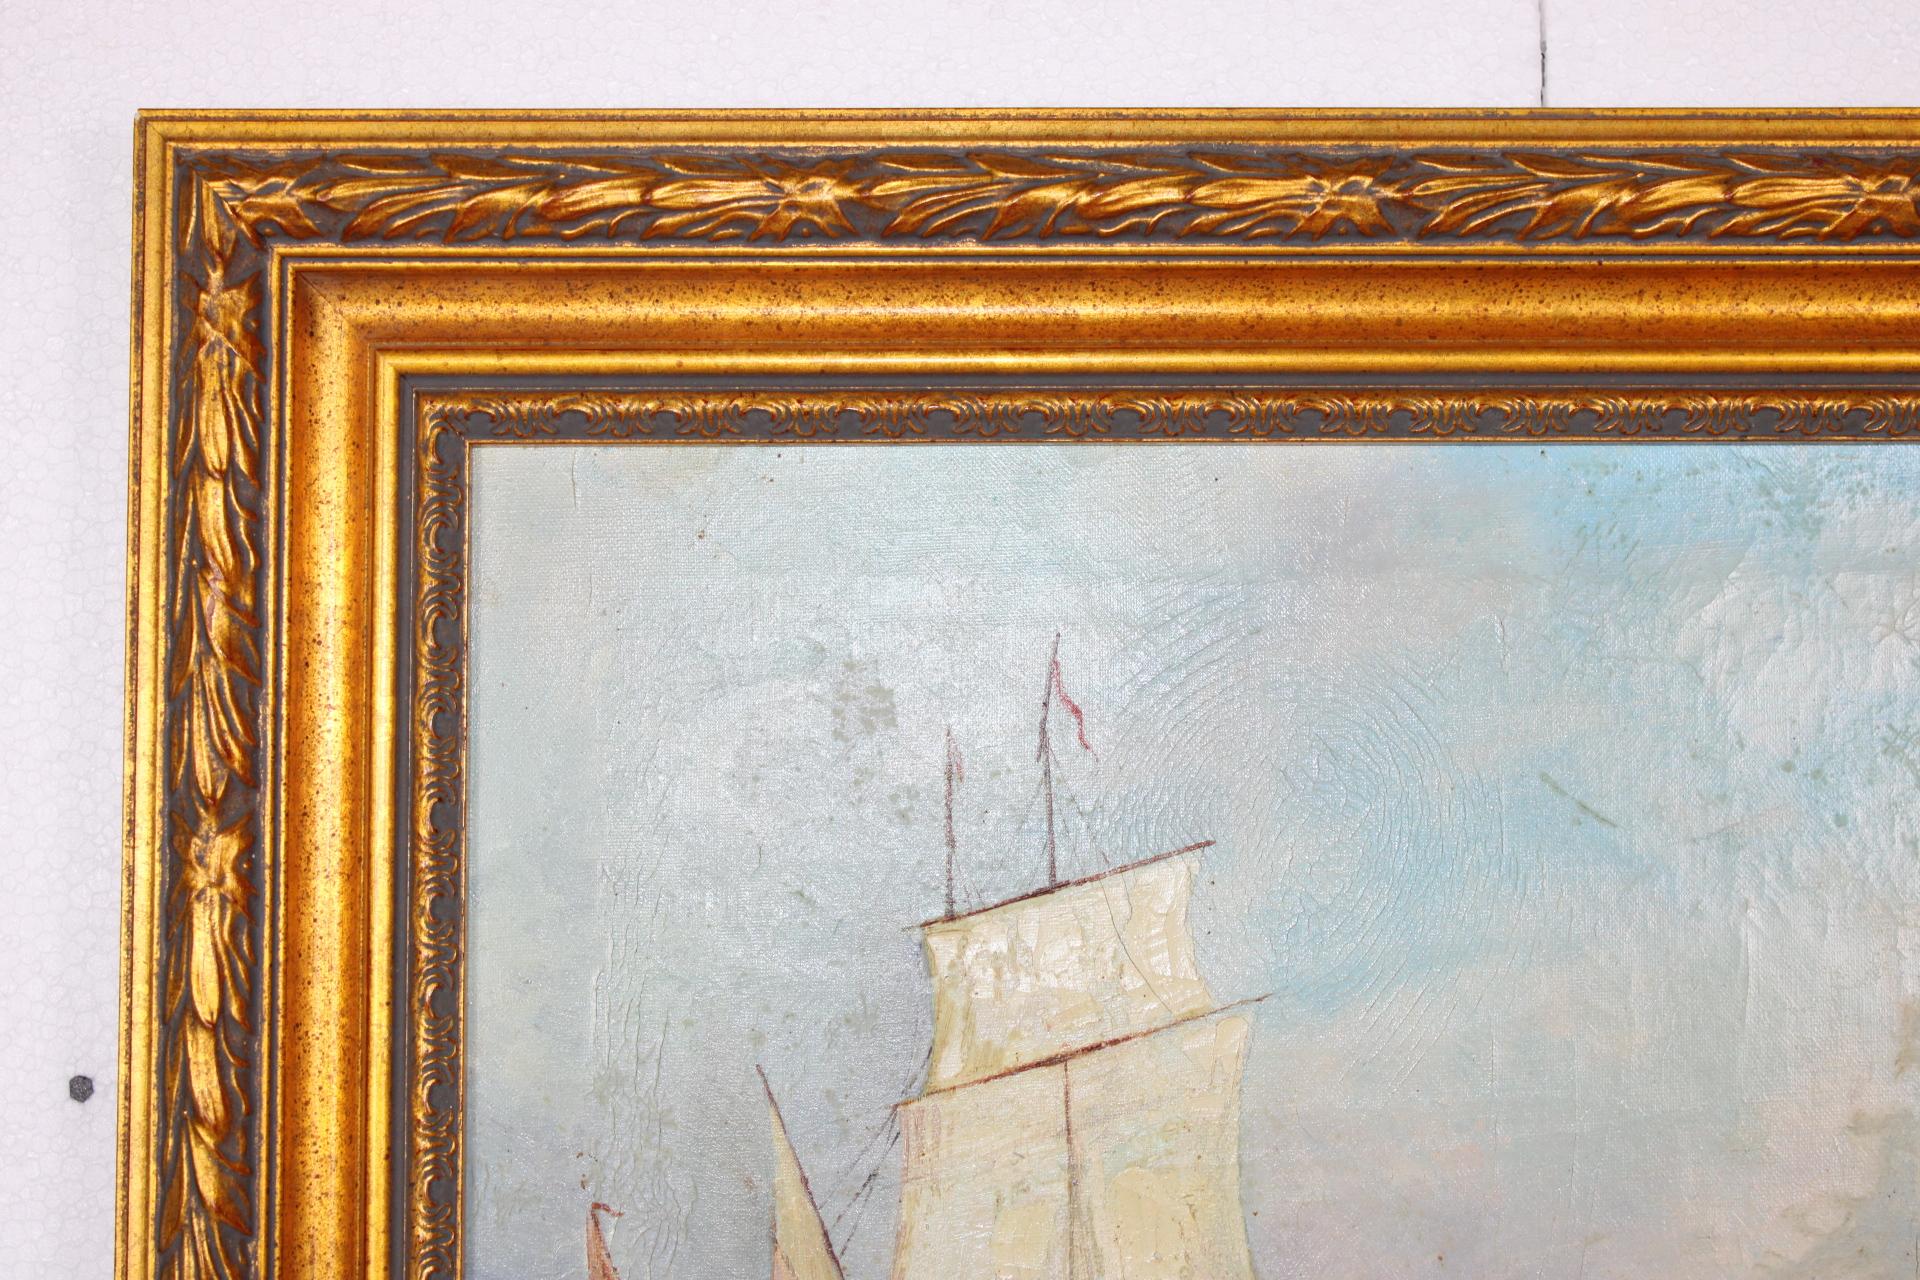 *Dimensions include the frame

This maritime scene is reminiscent of the Impressionist fascination with water, light, and atmosphere. The painting features a lighthouse and architecture in the background, which may suggest an inspiration from the